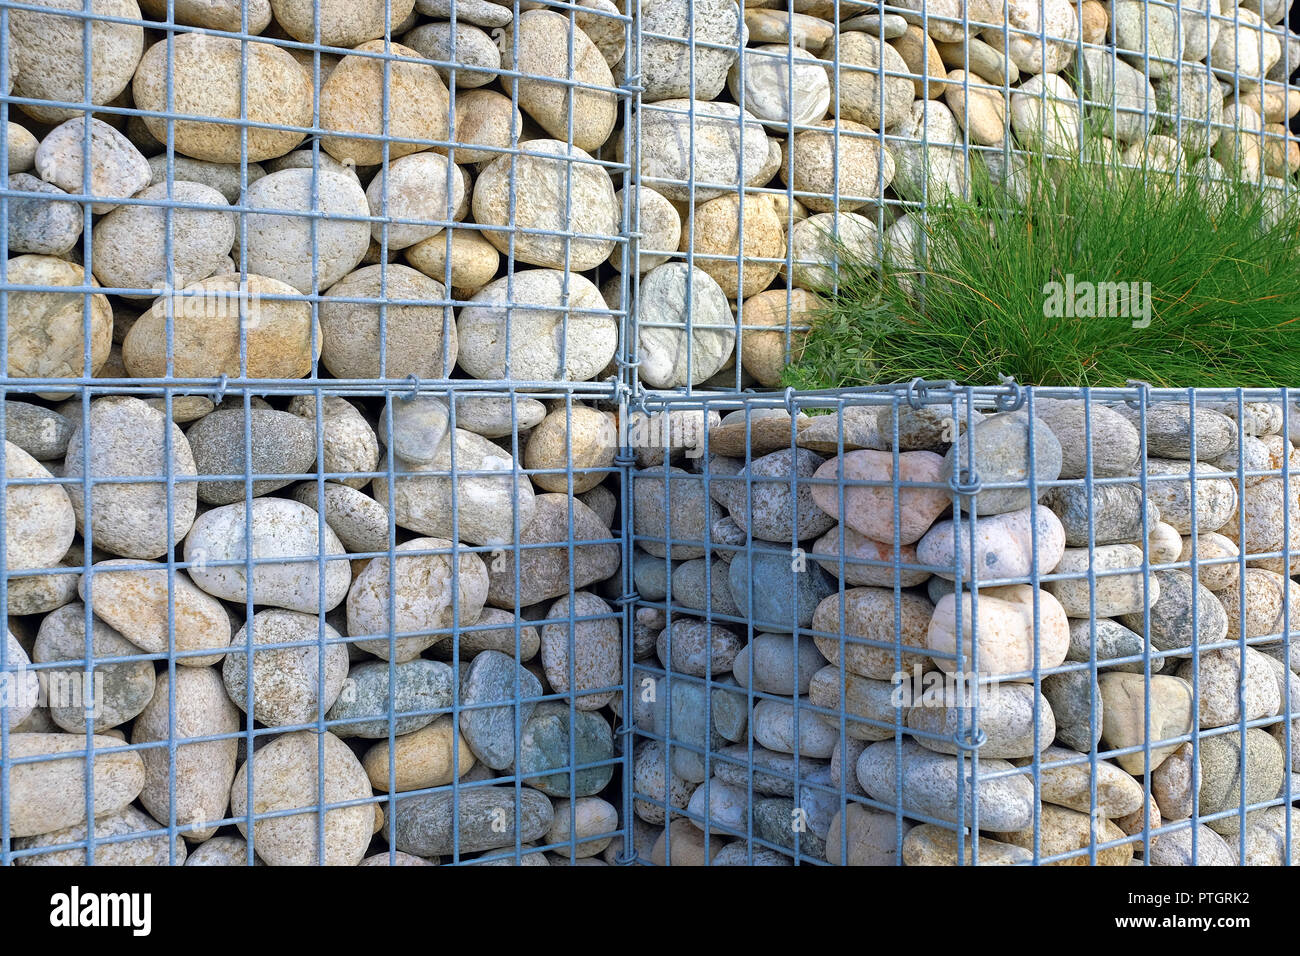 Stone walls in a metal grid. The design of the Mall Parking lot. Stock Photo